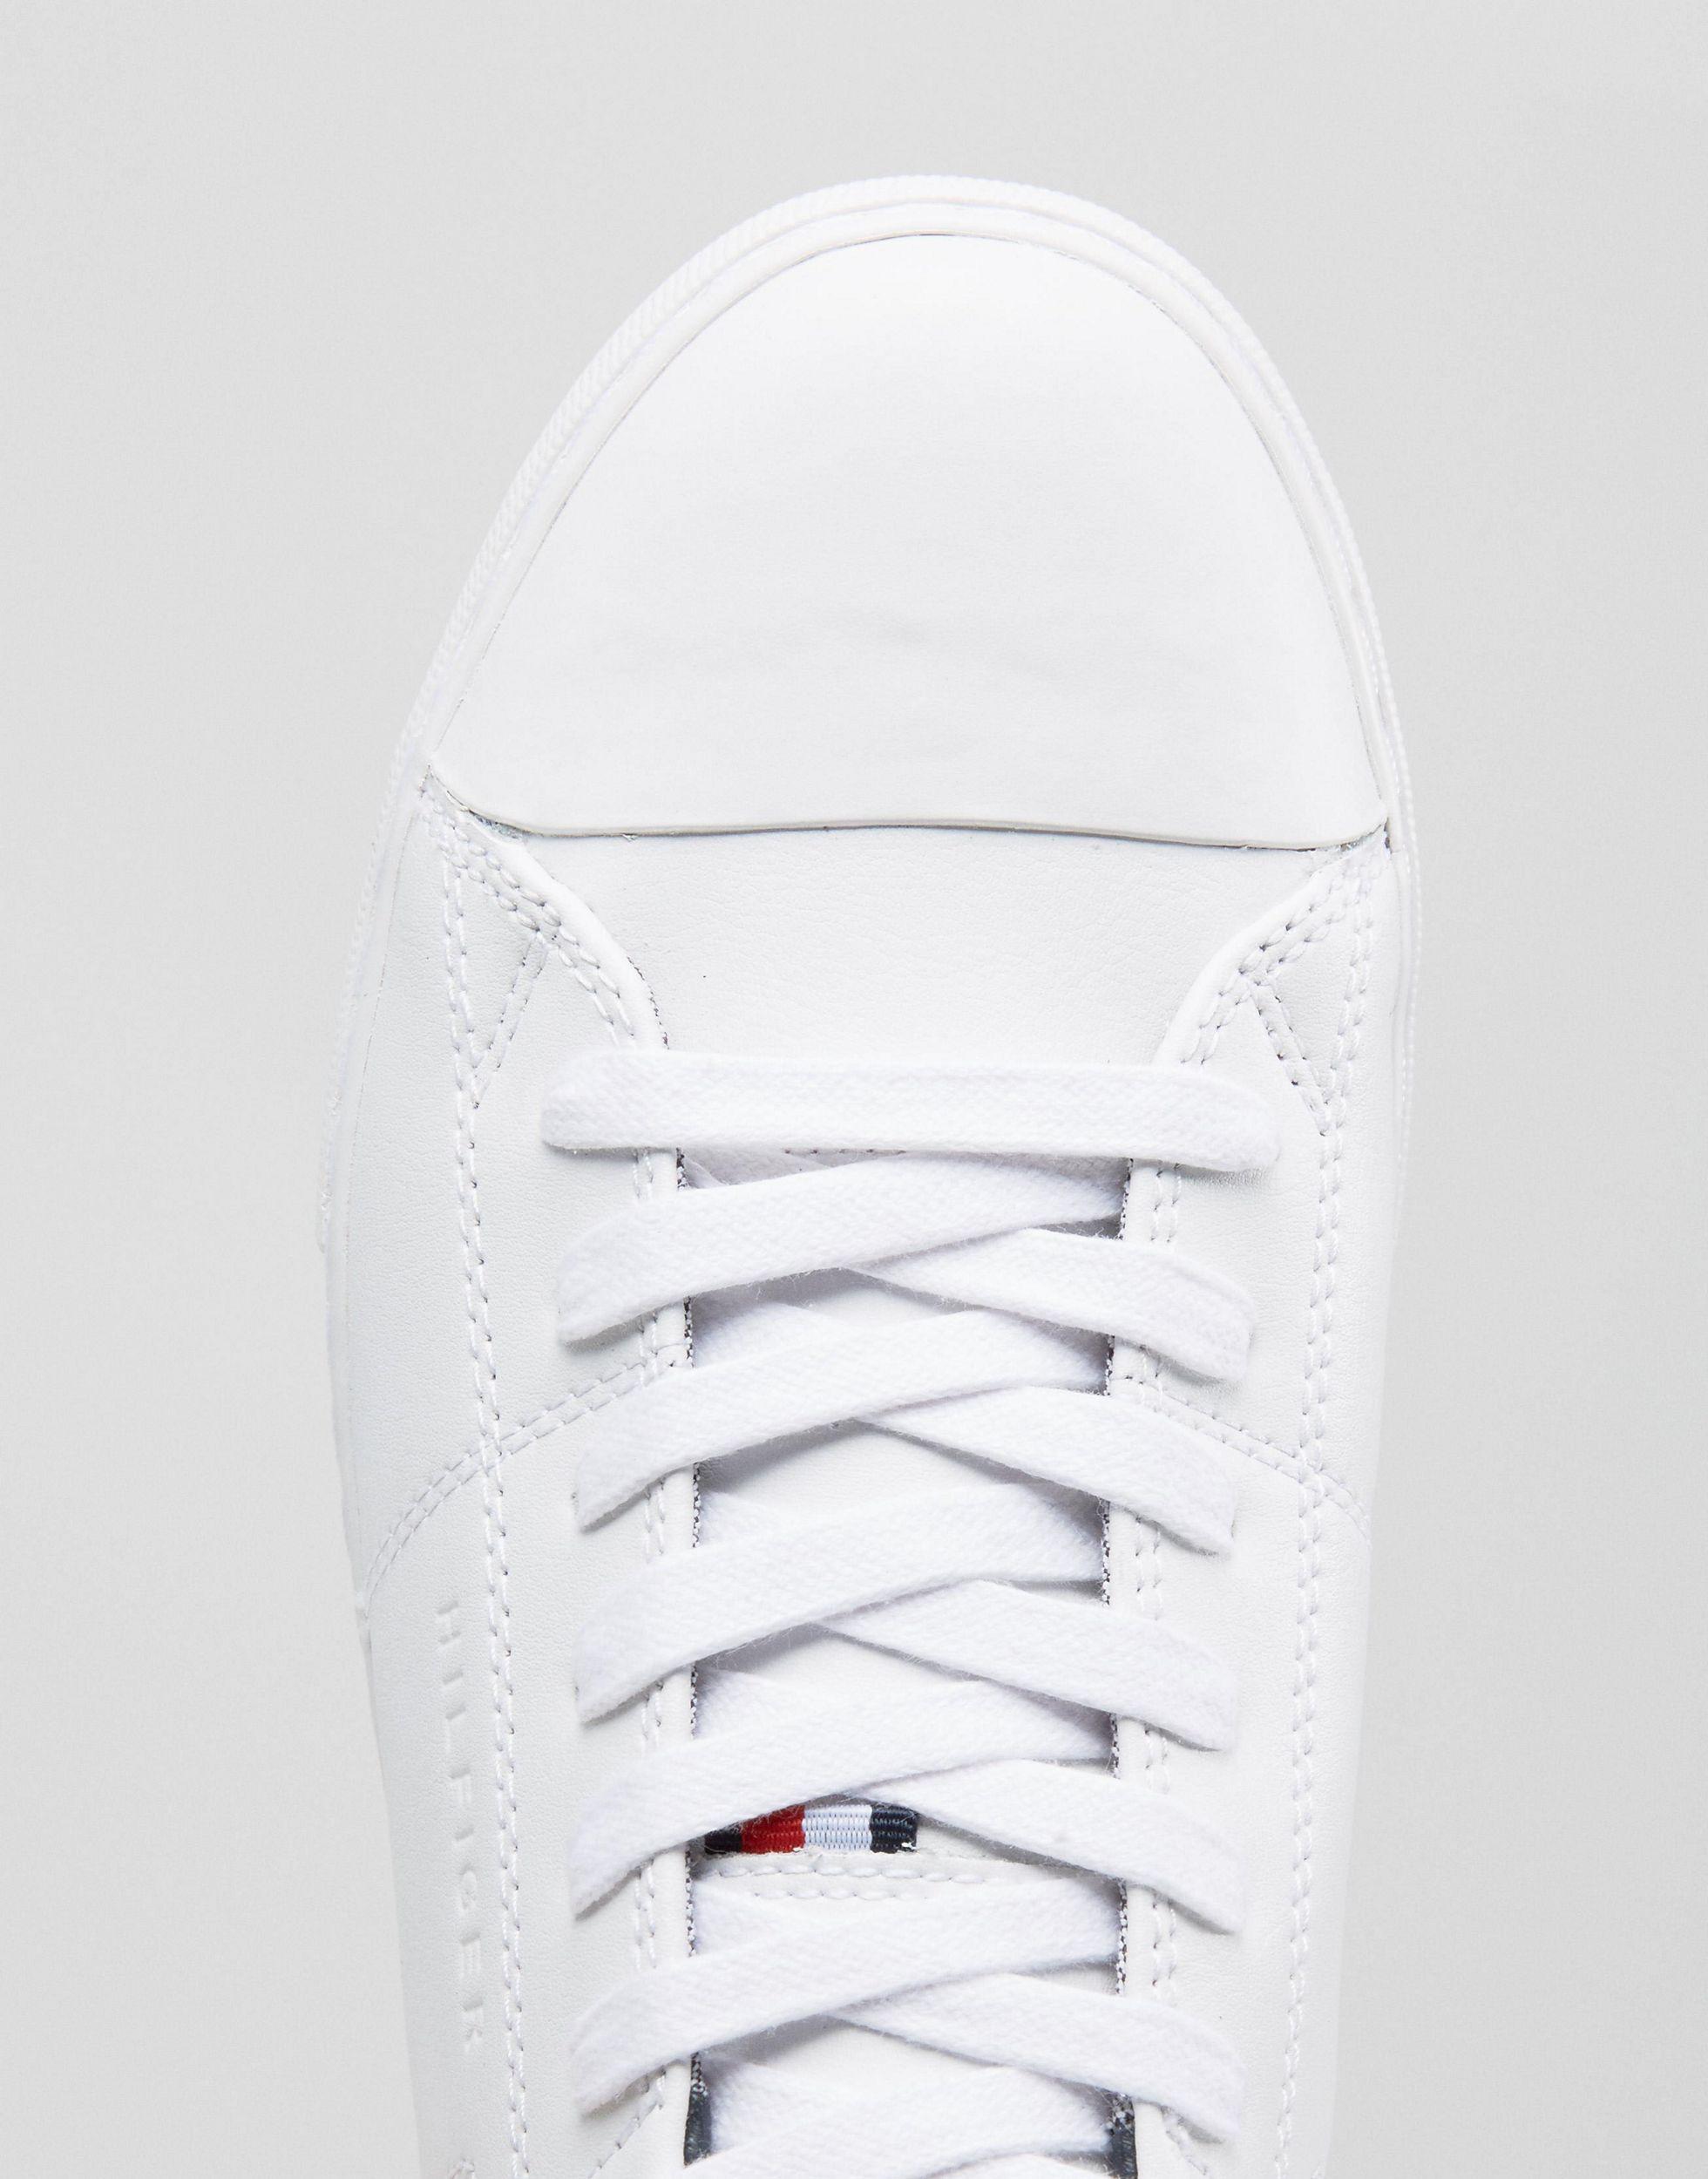 Tommy Hilfiger Jay Leather Sneakers in White for Men - Lyst